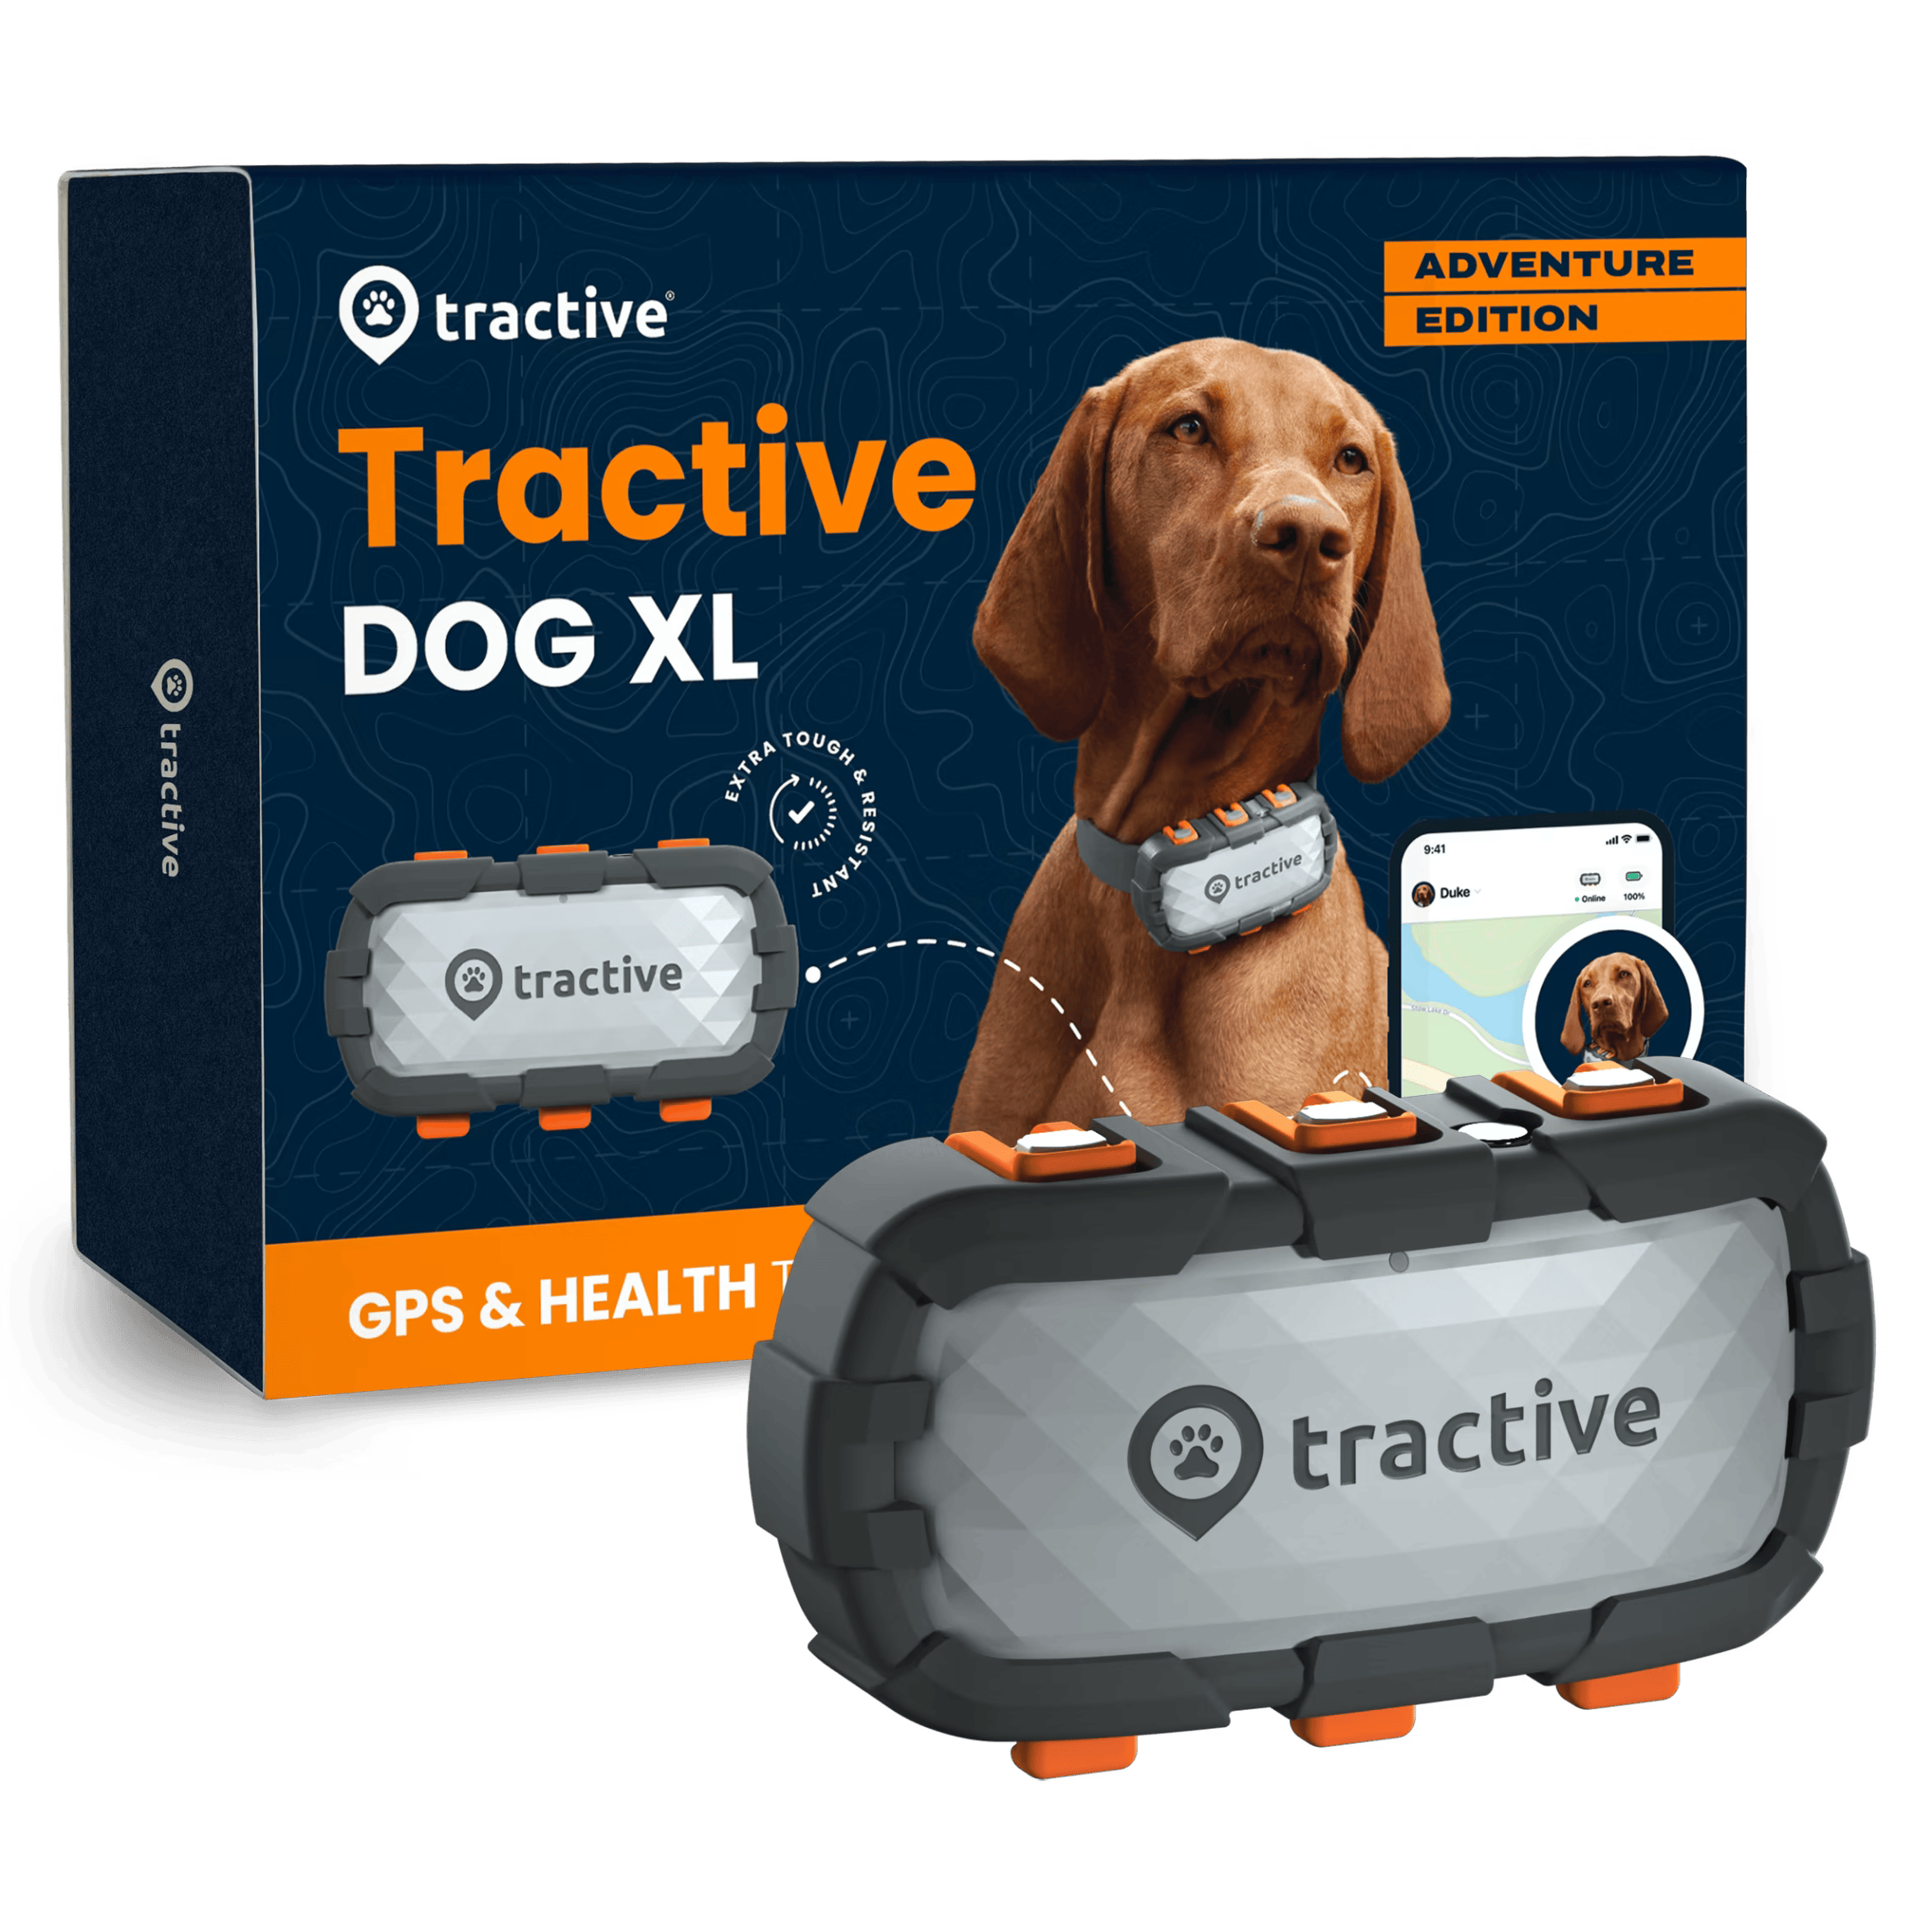 tractive-dog-xl-adventure-packaging.png